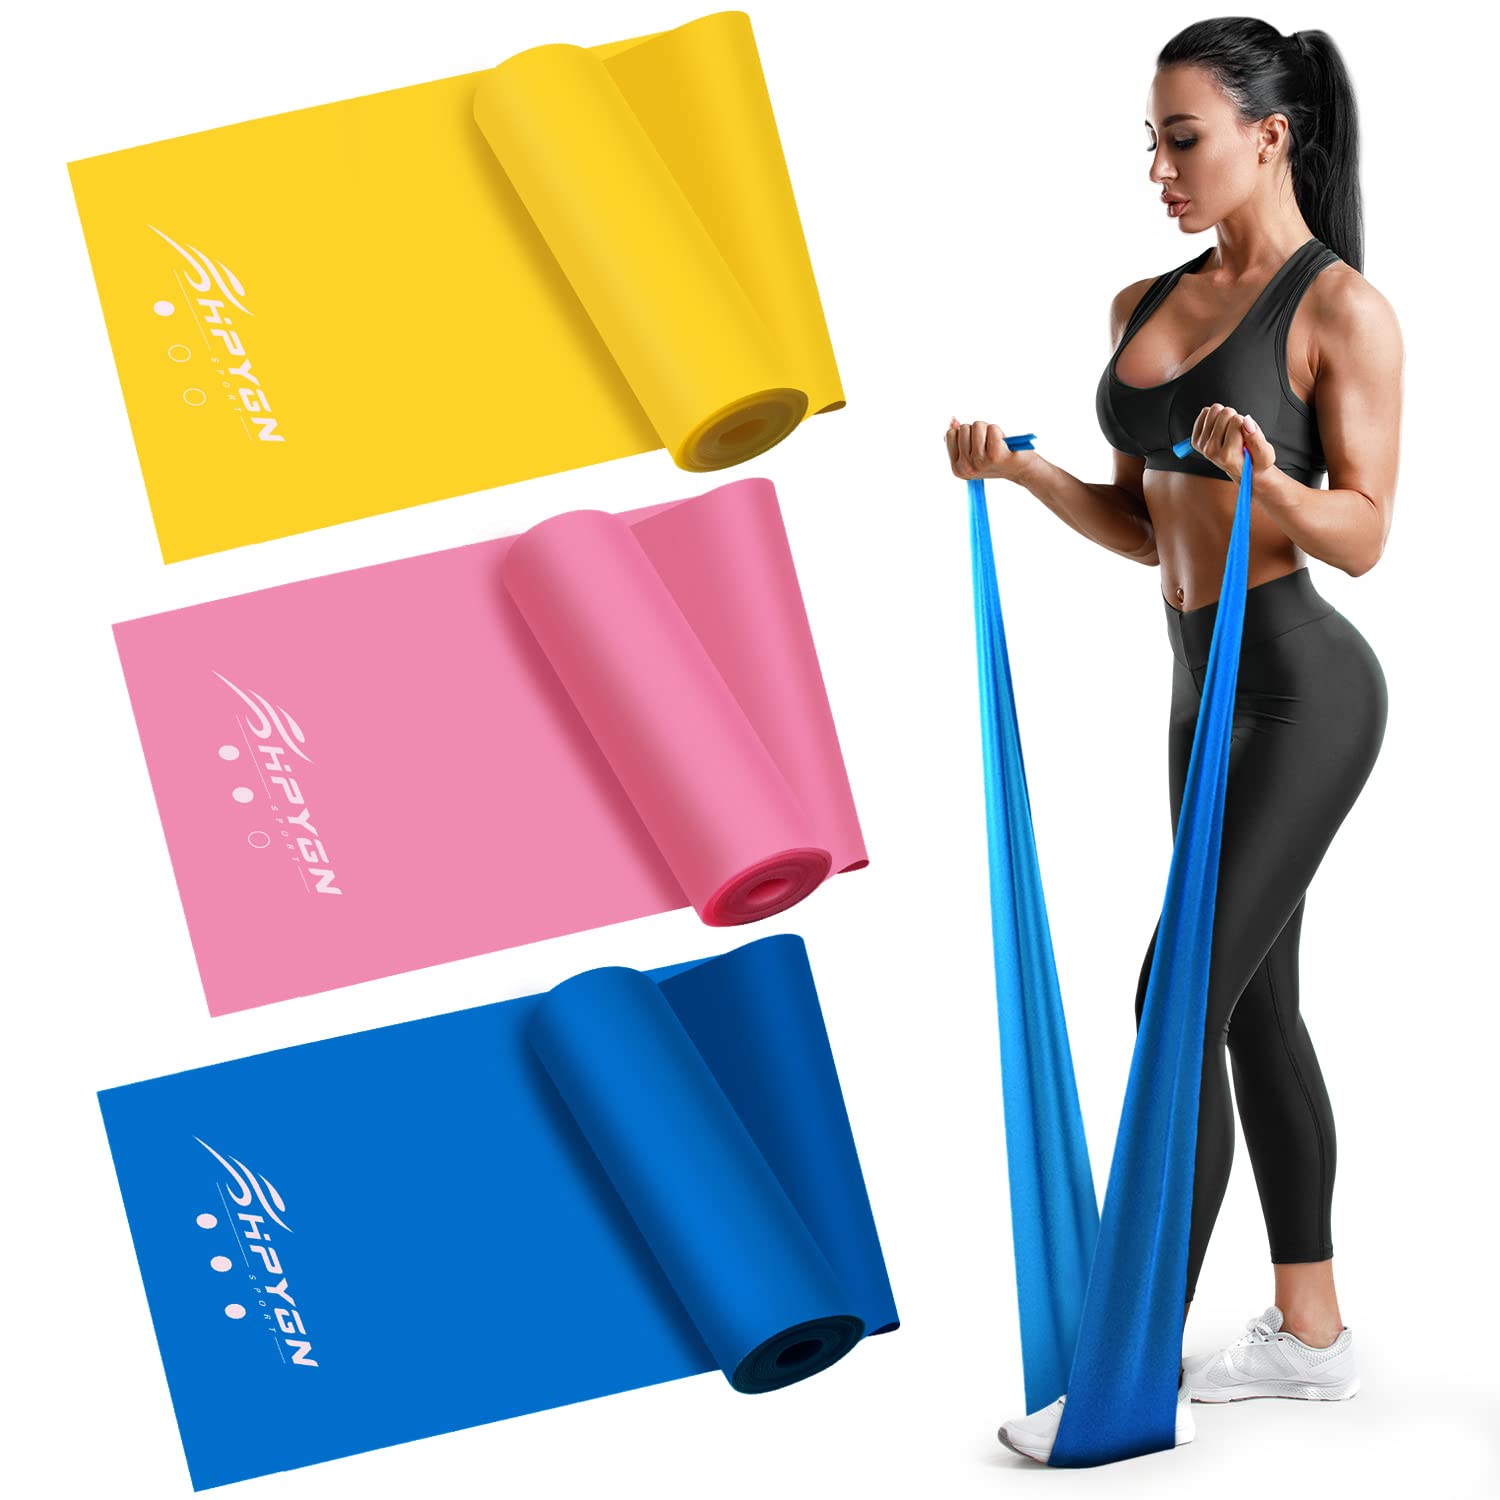 Resistance Bands Set, Exercise Bands for Physical Therapy, Strength  Training, Yoga, Pilates, Stretching, Elastic Band with Different  Strengths,Workout Bands for Home Gym 4.9ft Blue/Yellow/Pink